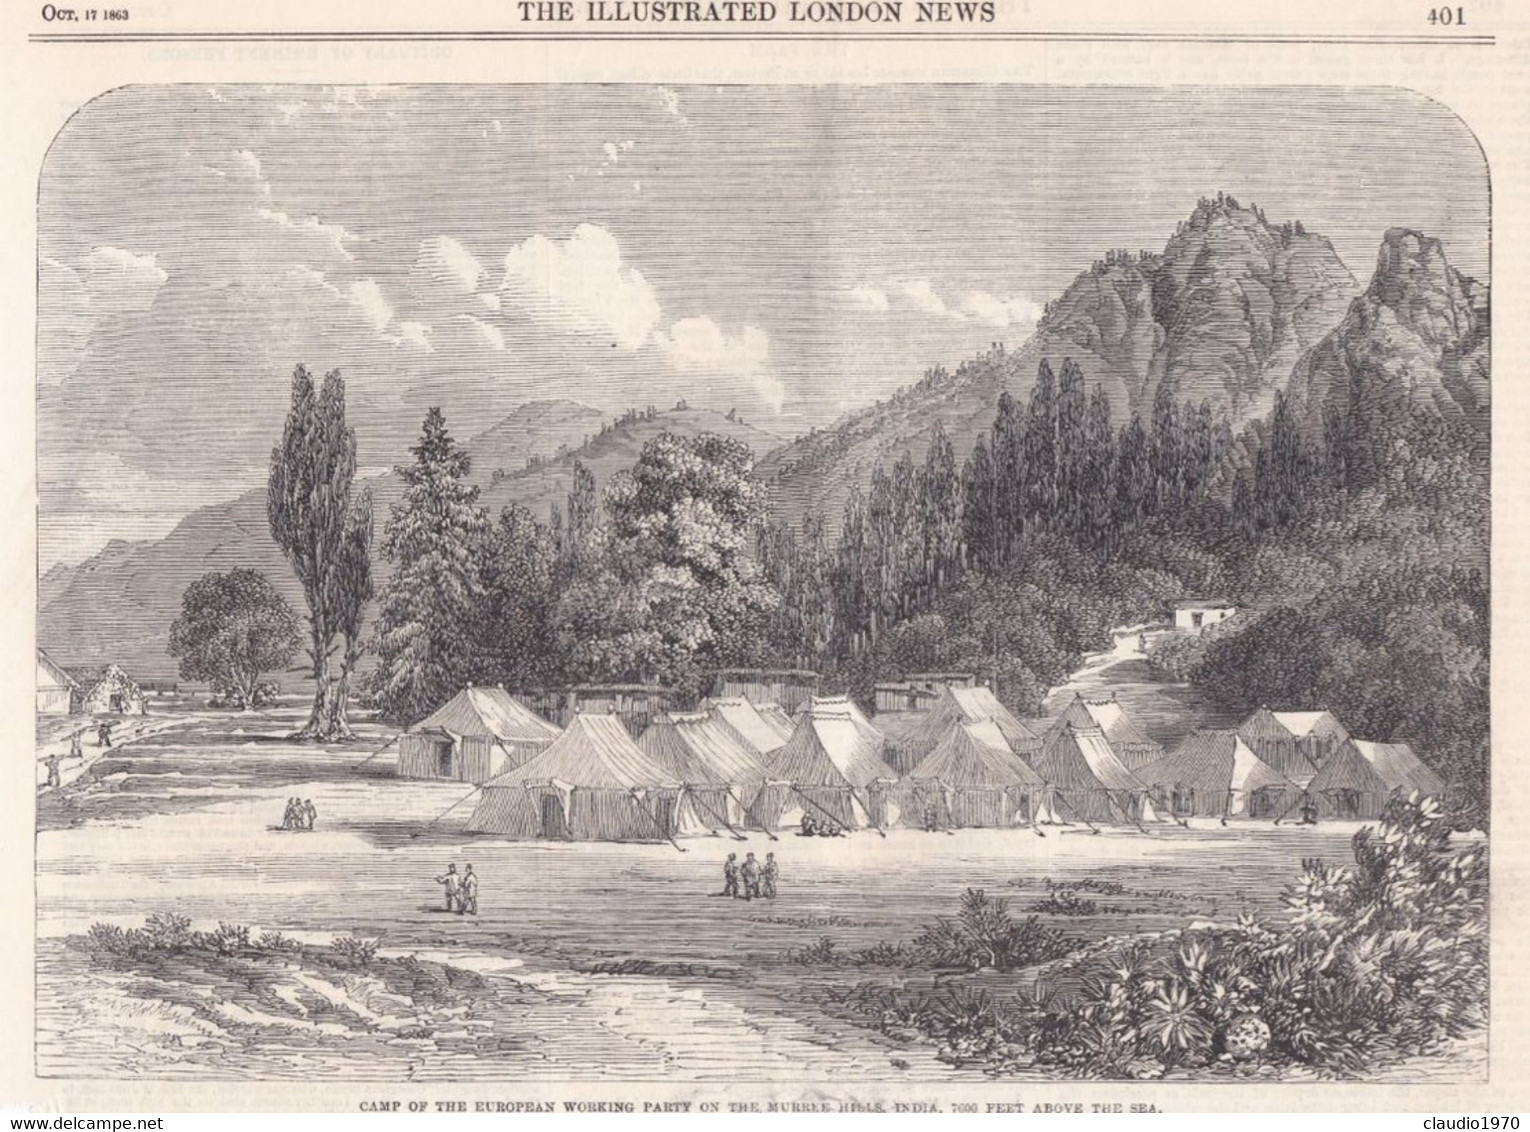 THE ILLUSTRATED LONDON NEWS  - RITAGLIO - STAMPA -CAMP OF EUROPEAN WORKING PARTY ON THE MURREE HELLES INDIA 700 - Unclassified